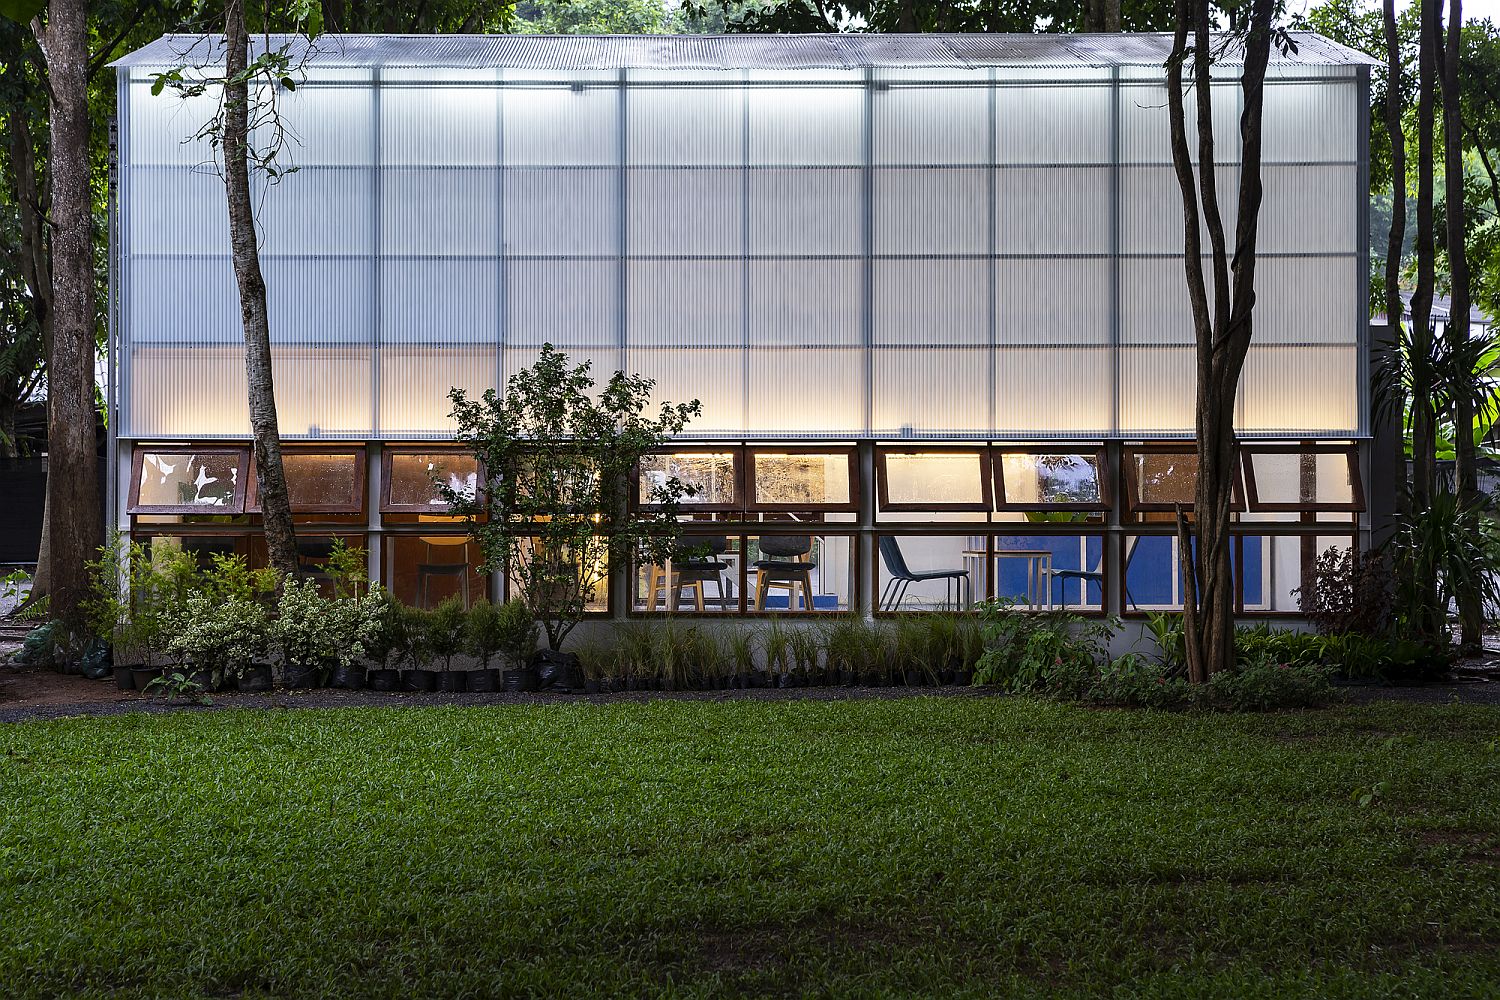 Fabulous new library in Thailand with a steel frame and glass exterior